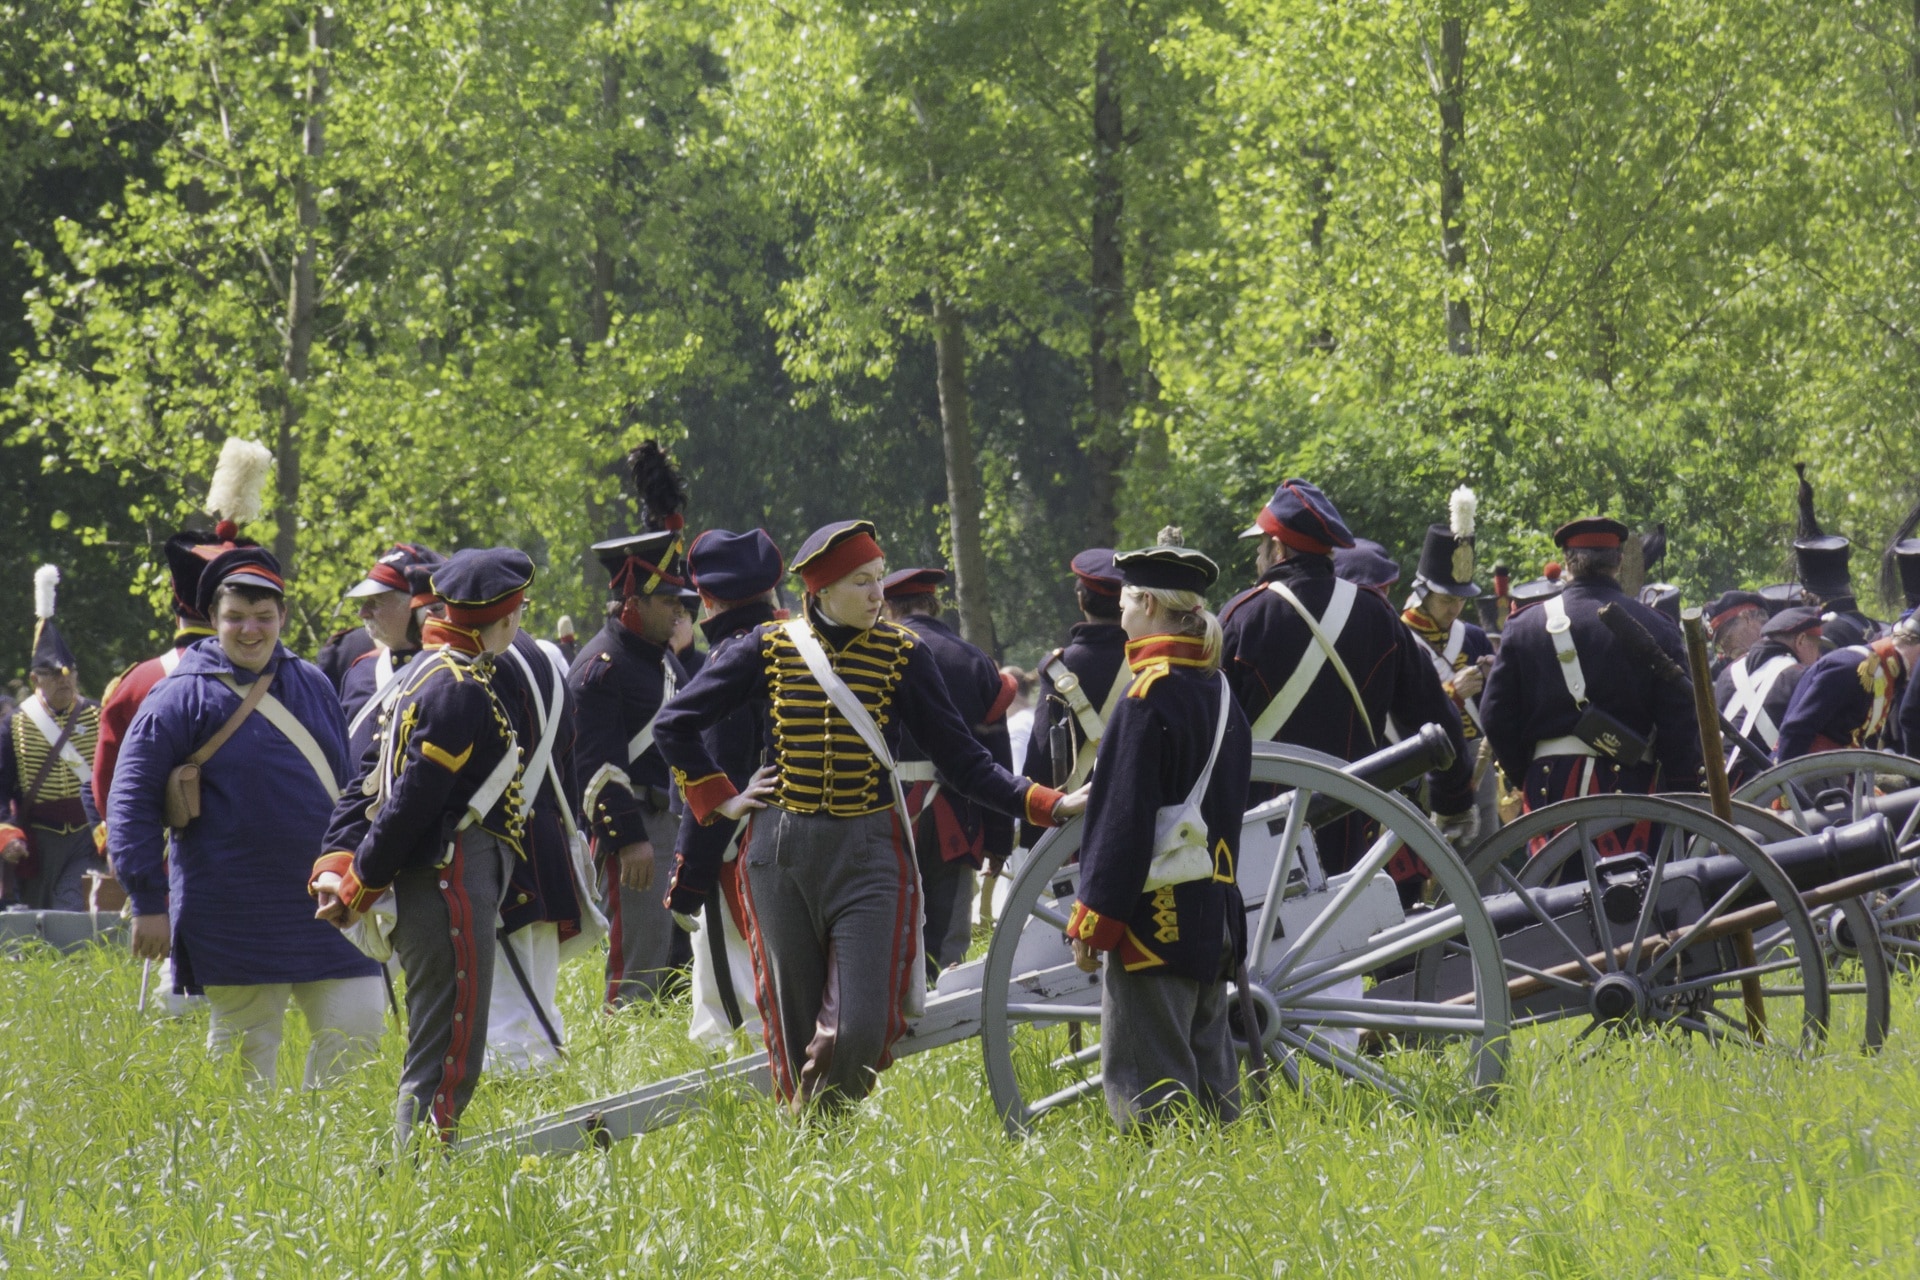 people at the field wearing uniforms with cannons during day